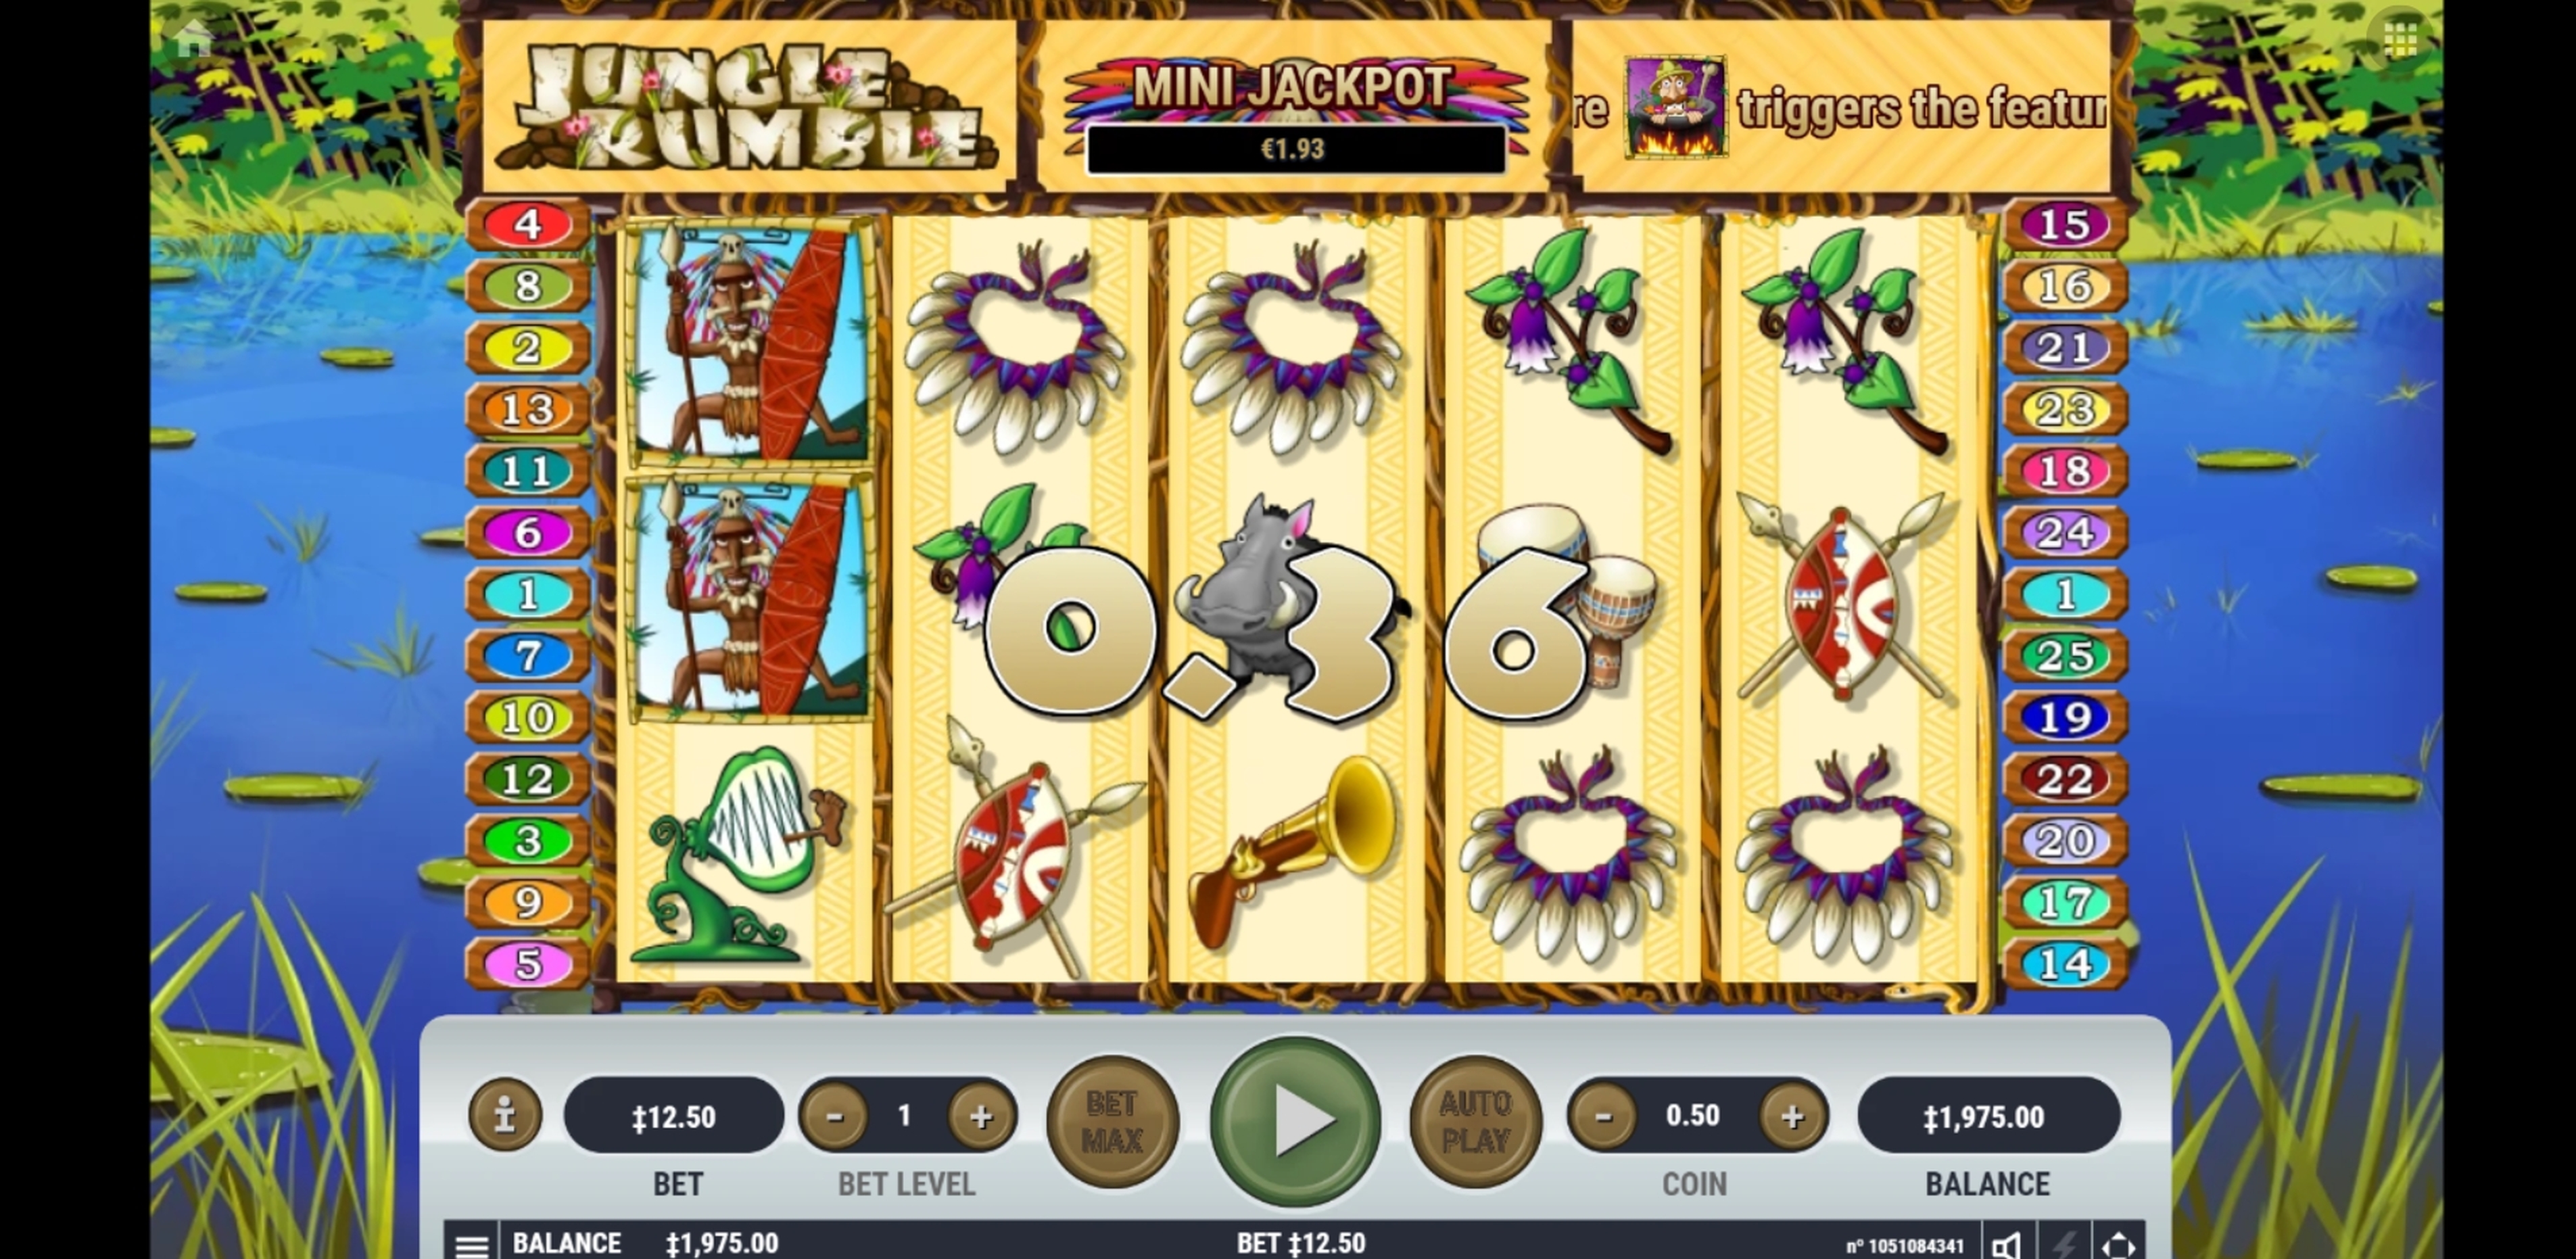 Win Money in Jungle Rumble Free Slot Game by Habanero